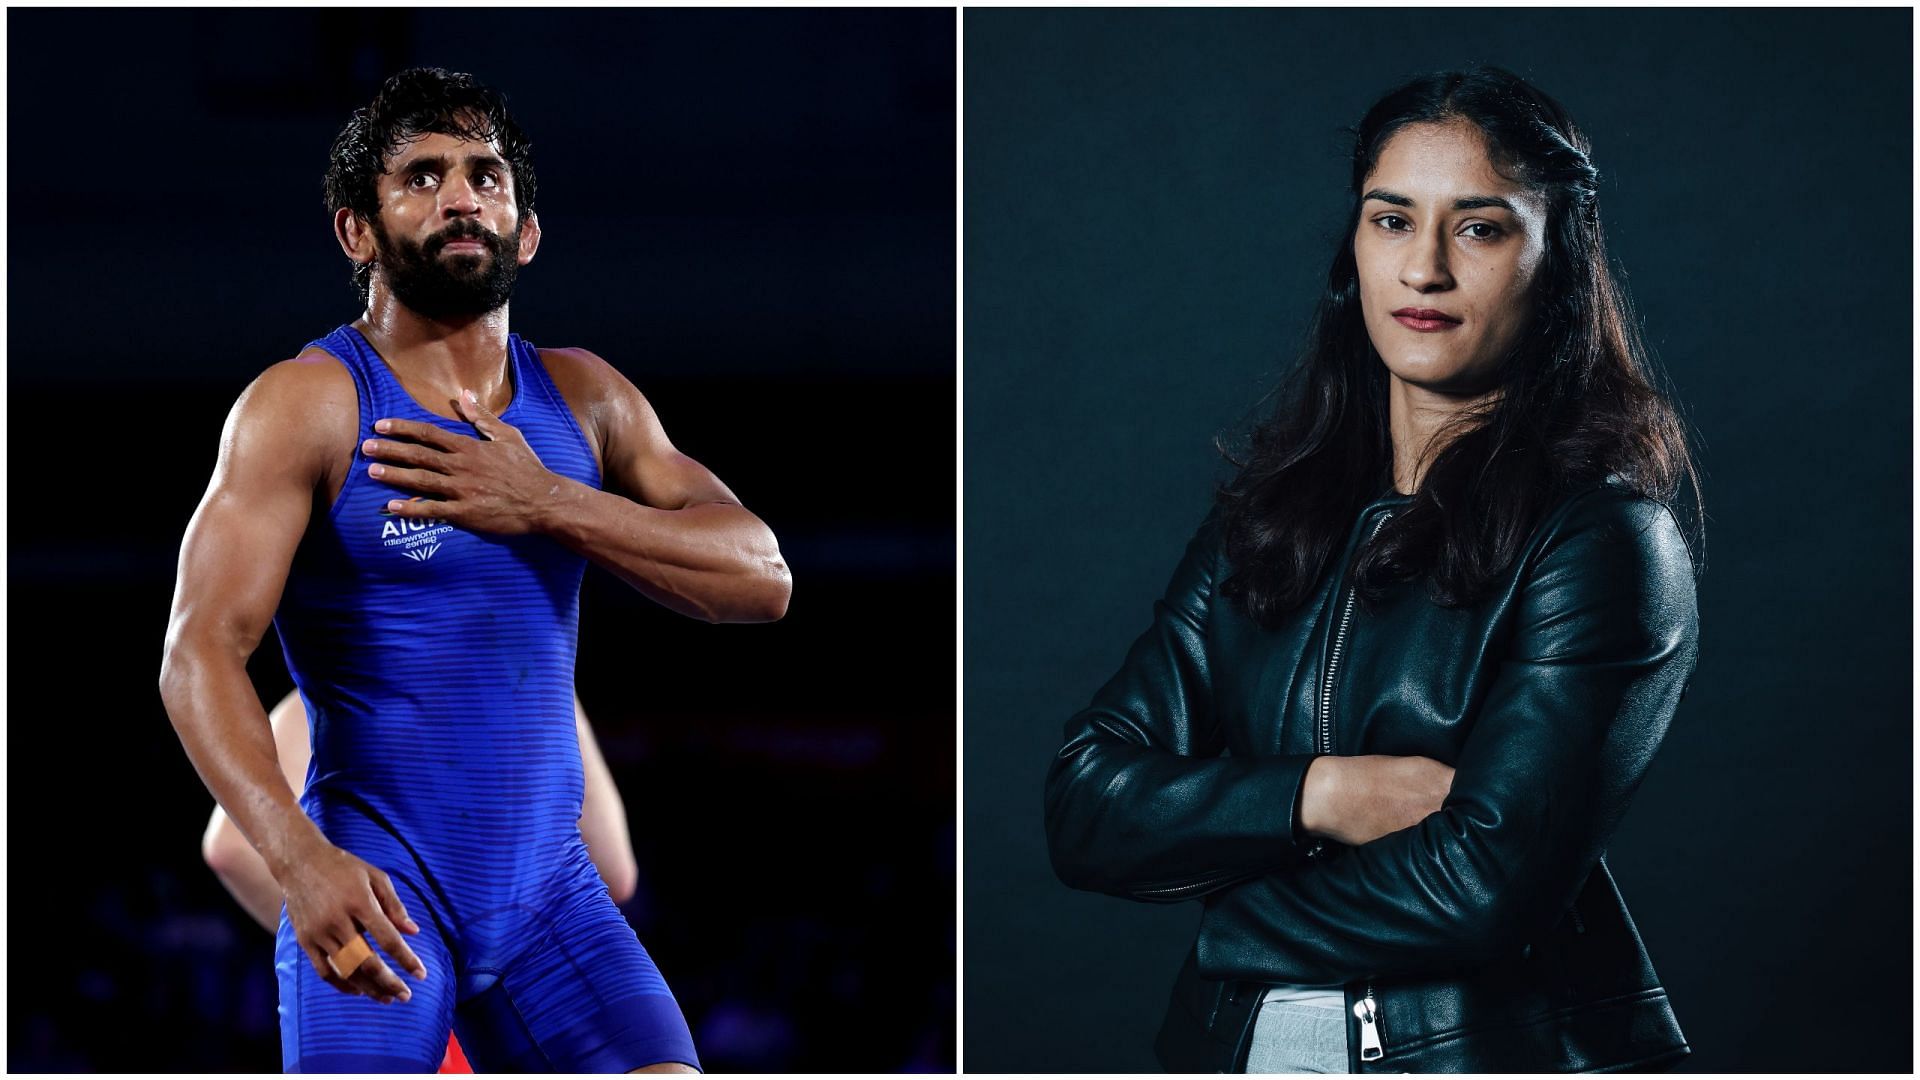 Bajrang Punia and Vinesh Phogat were given direct entries for the 2023 Asian Games.